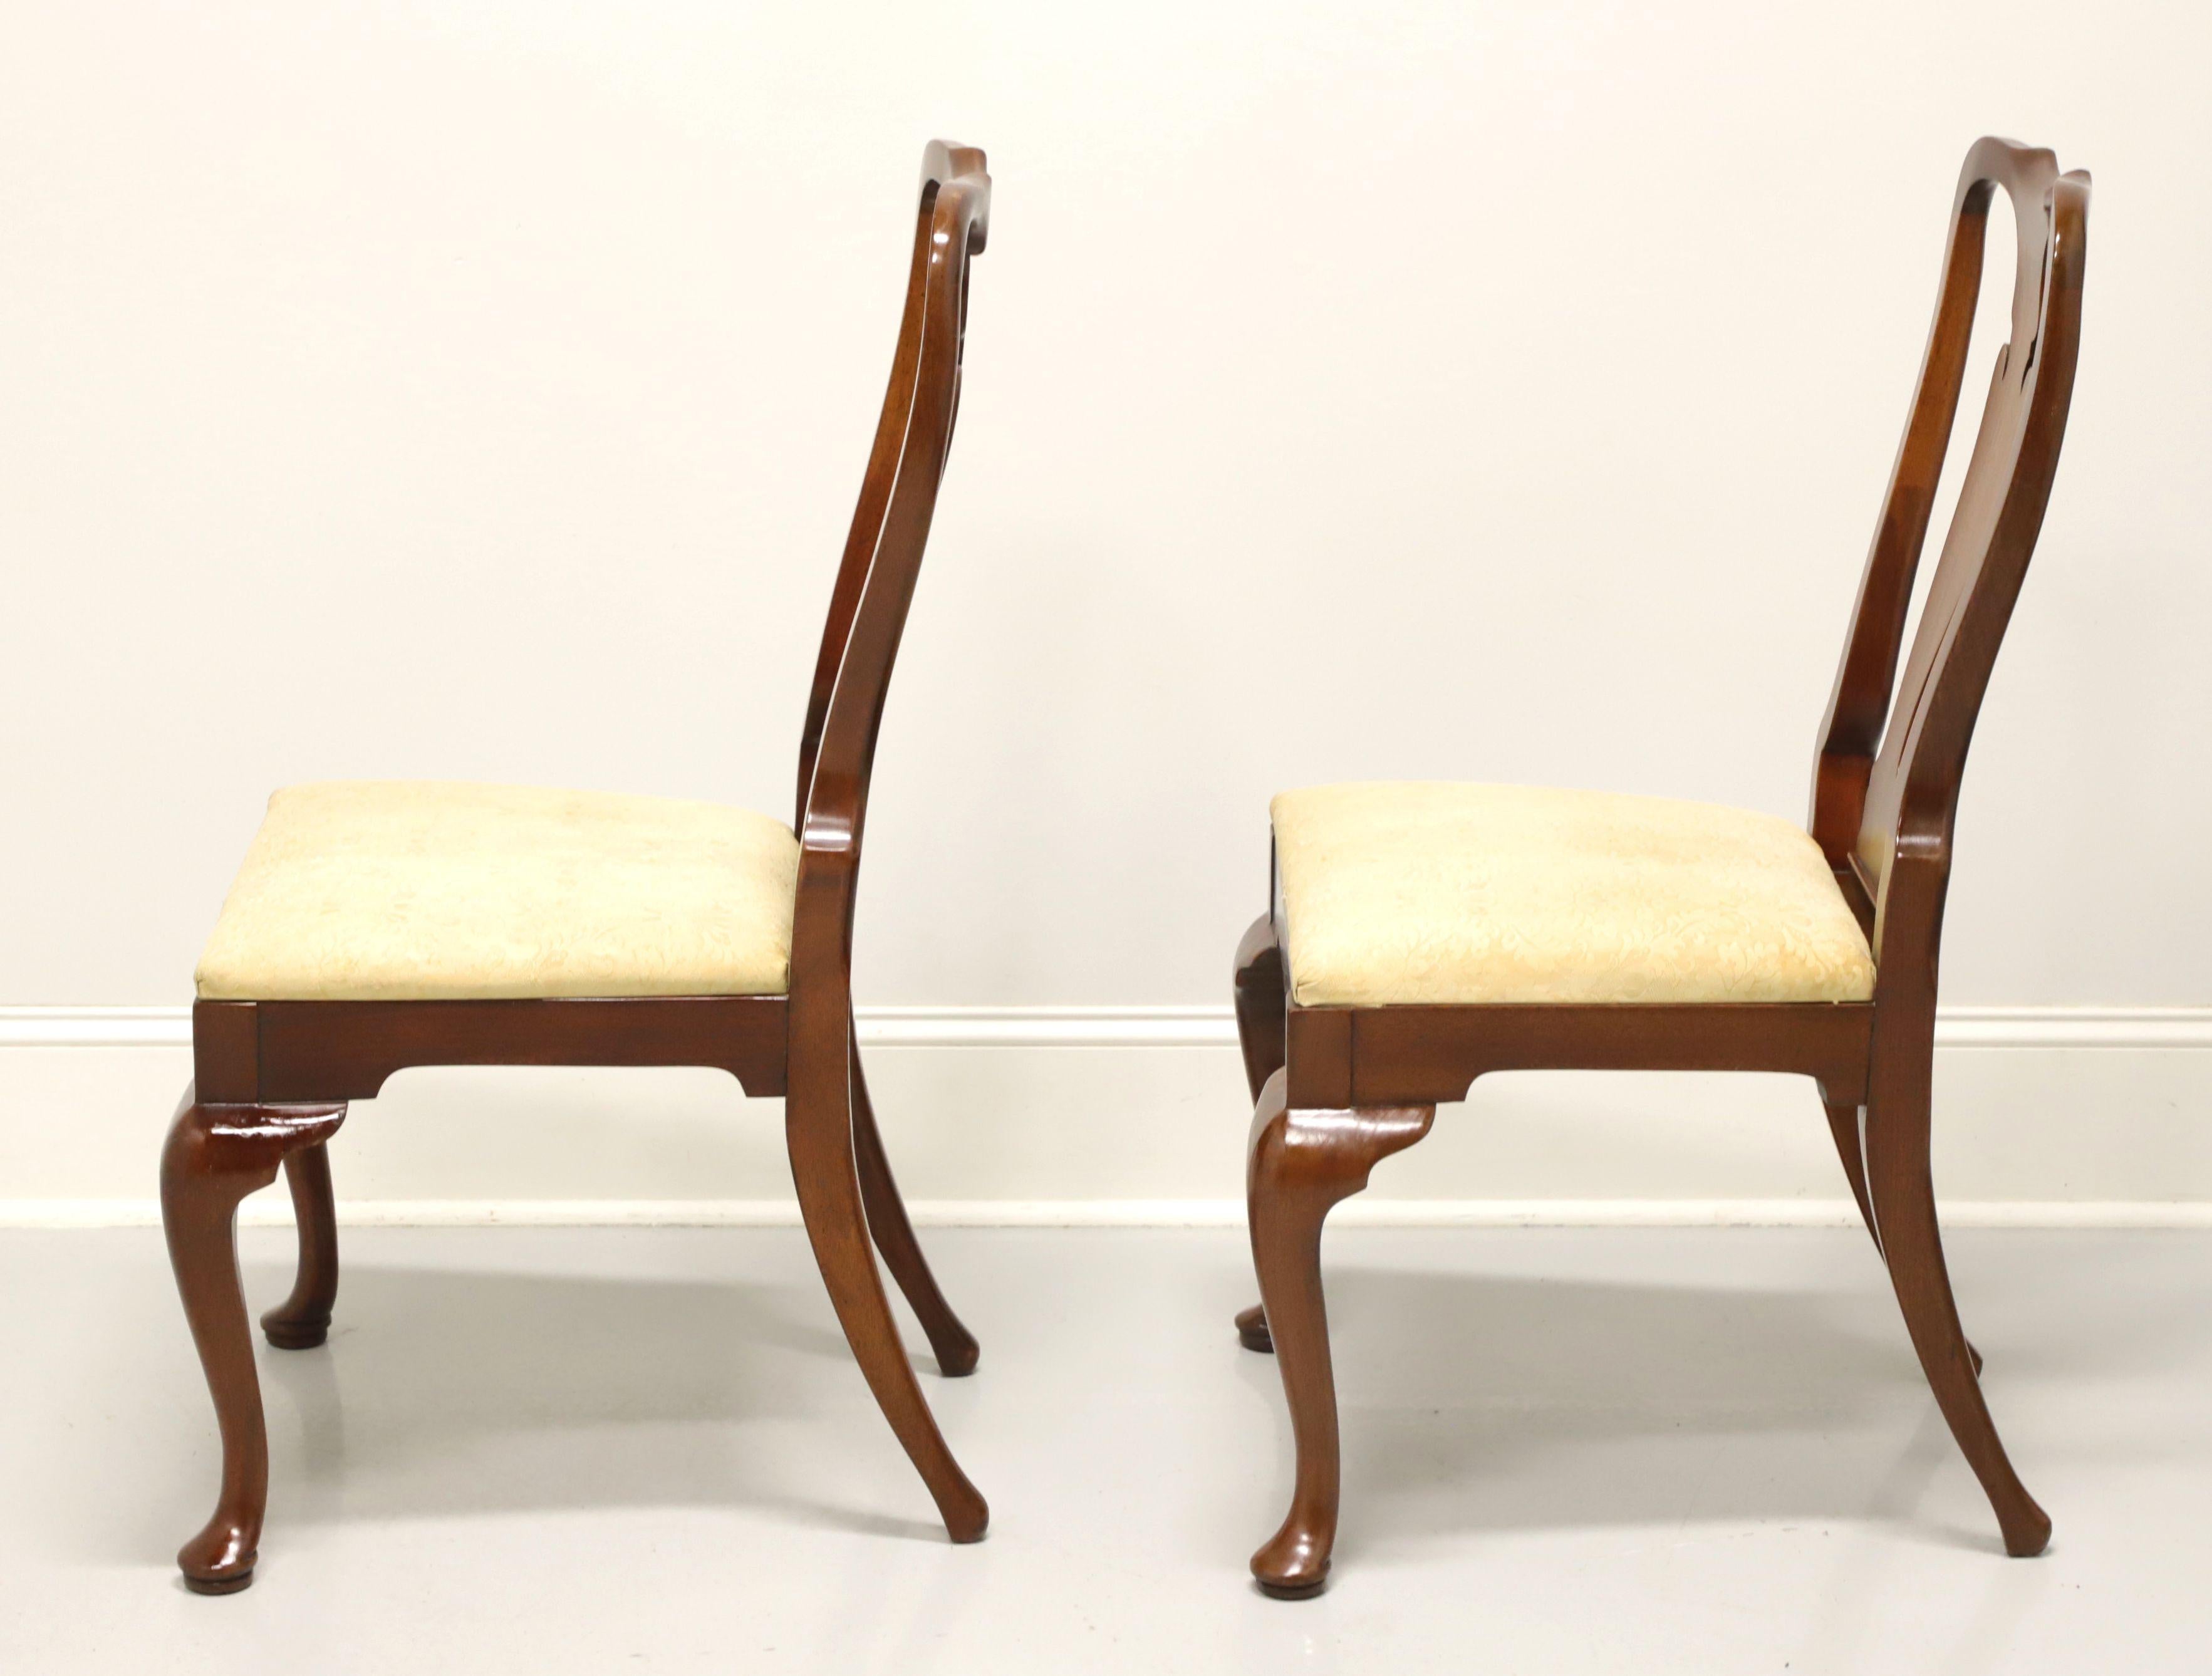 Fabric HICKORY CHAIR Amber Mahogany Queen Anne Dining Side Chairs - Pair C